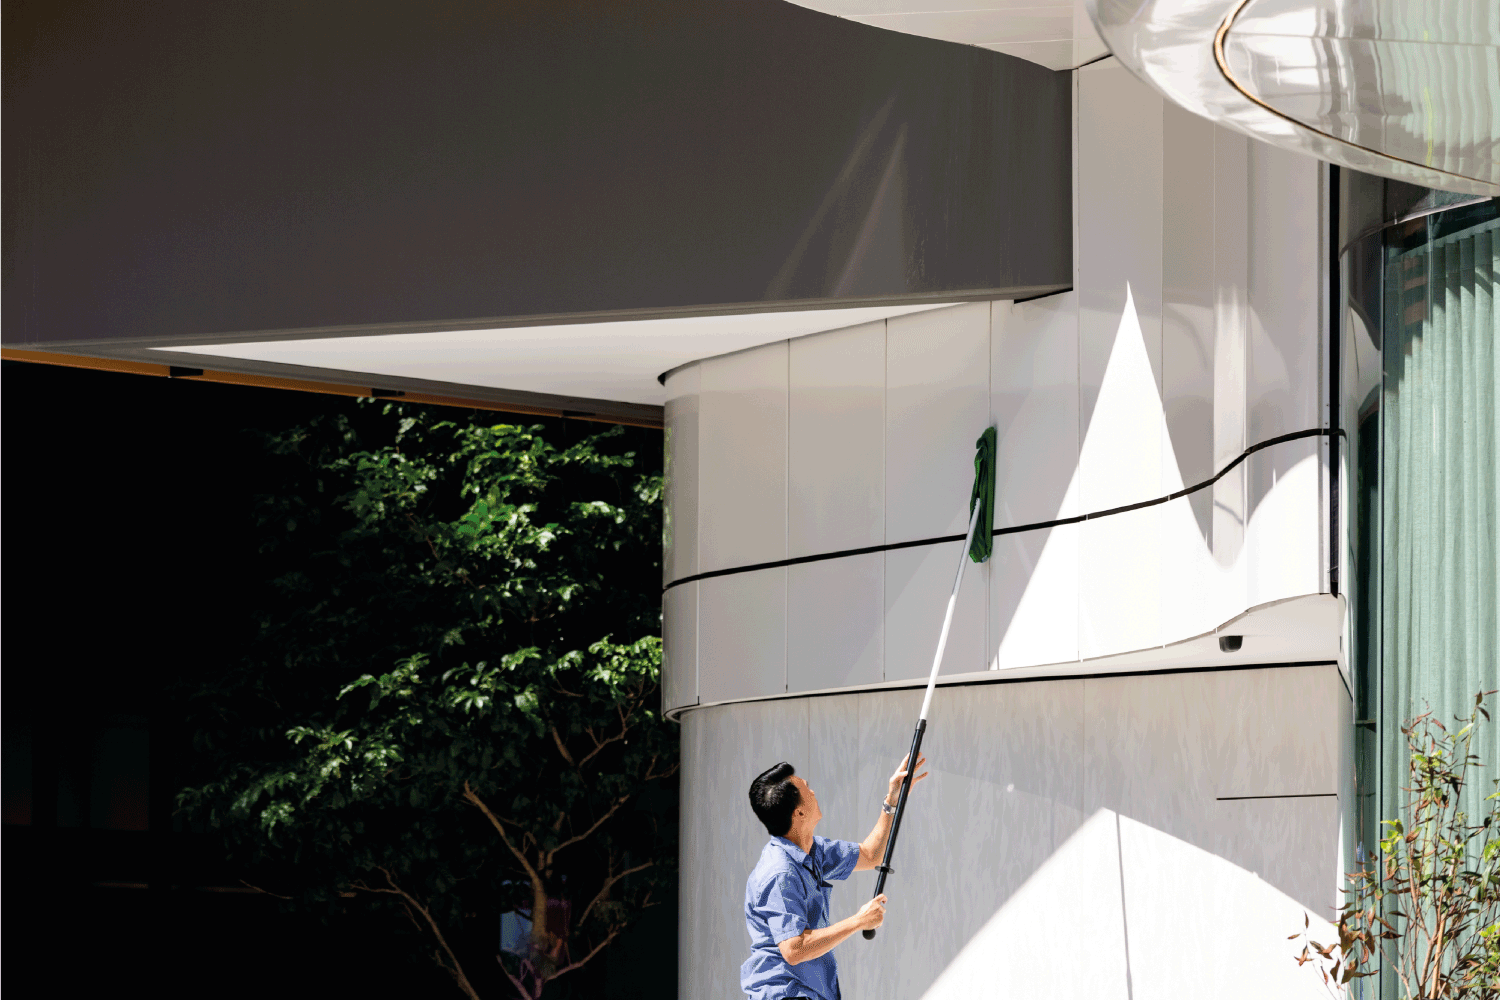 worker using sponge on a long pole to clean wall